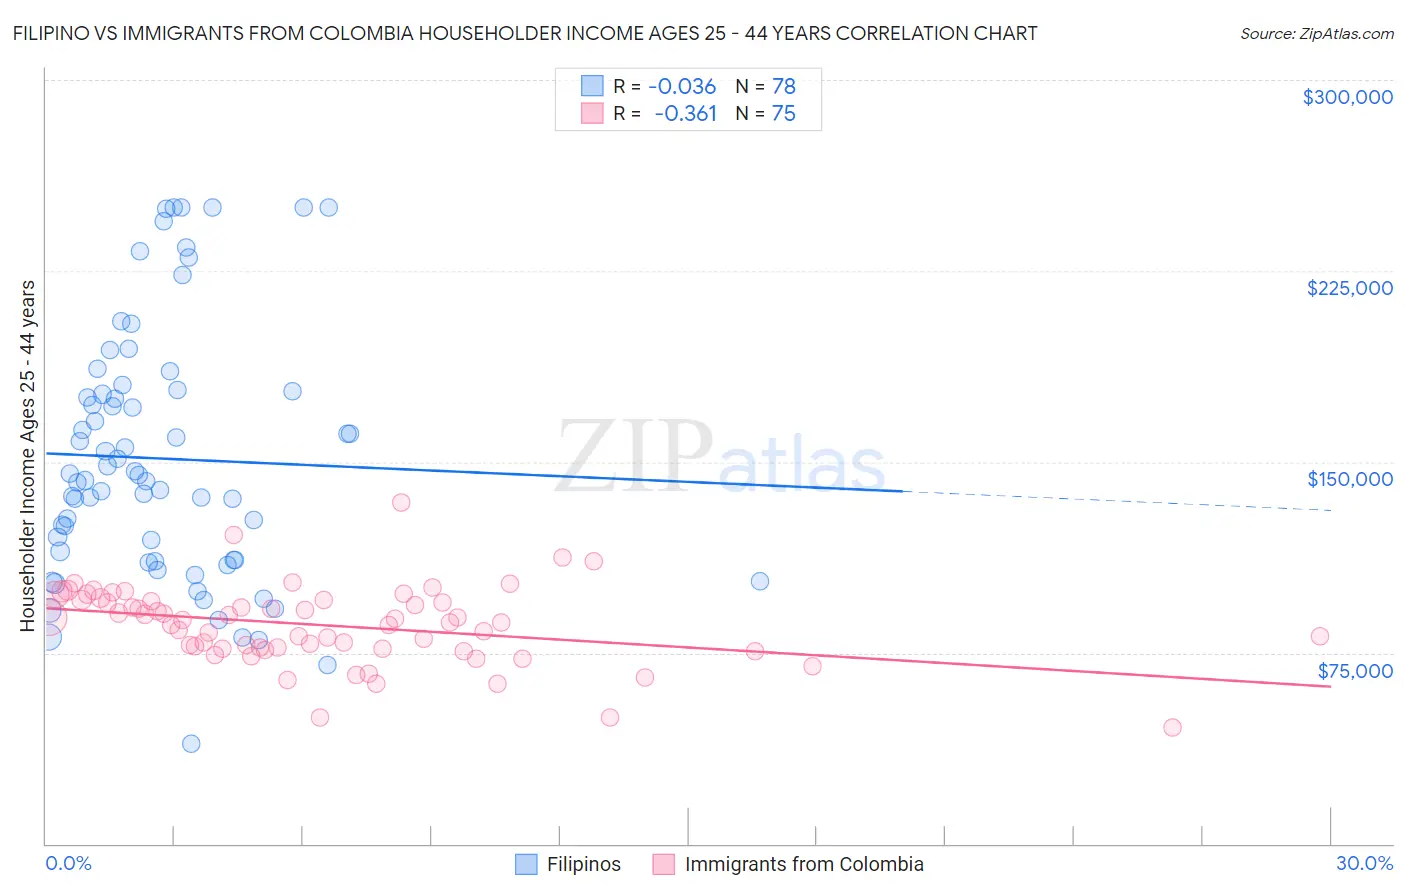 Filipino vs Immigrants from Colombia Householder Income Ages 25 - 44 years